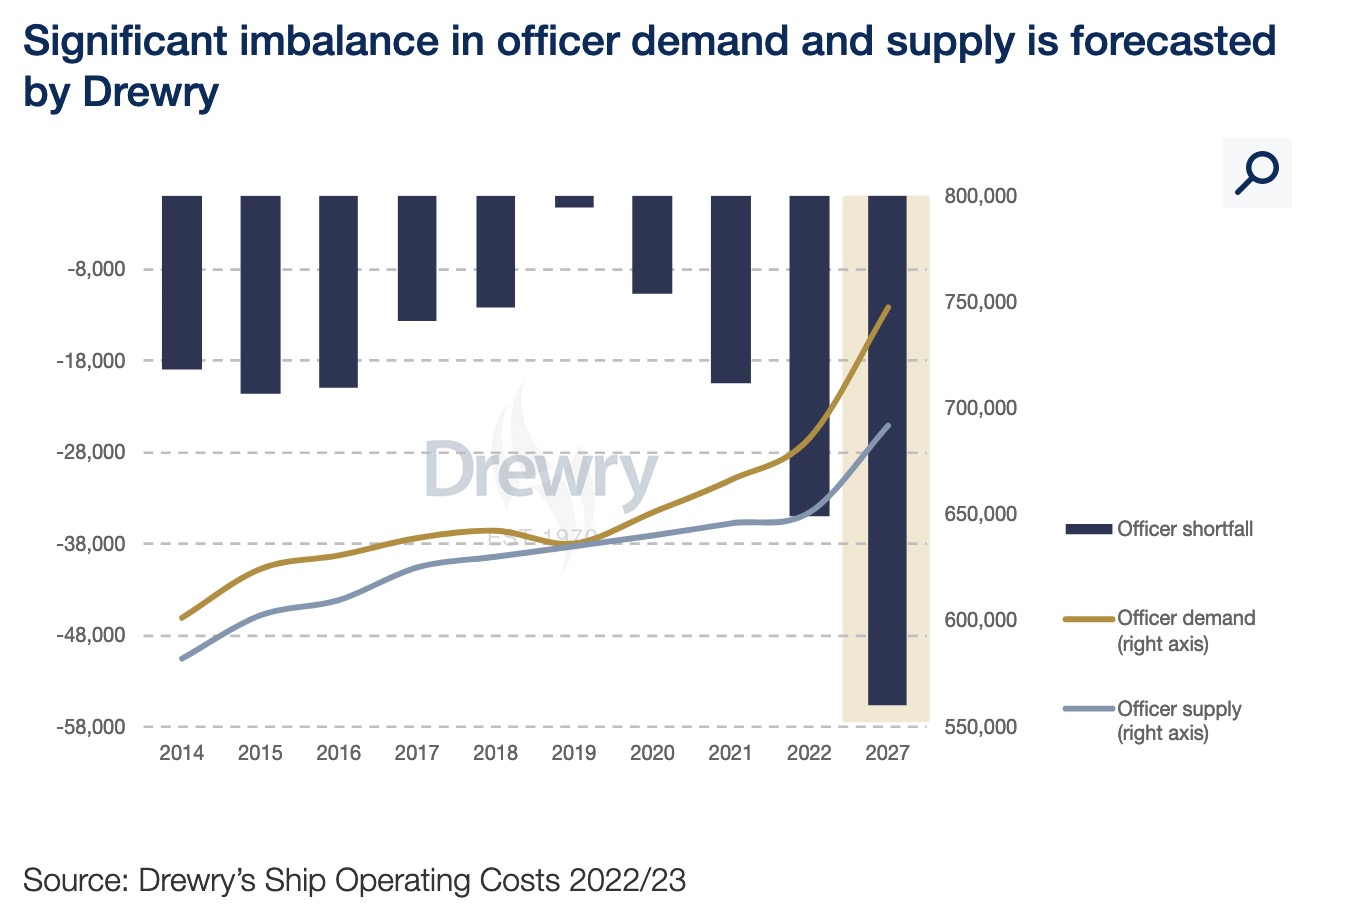 Significant imbalance in officer demand and supply is forecasted by Drewry